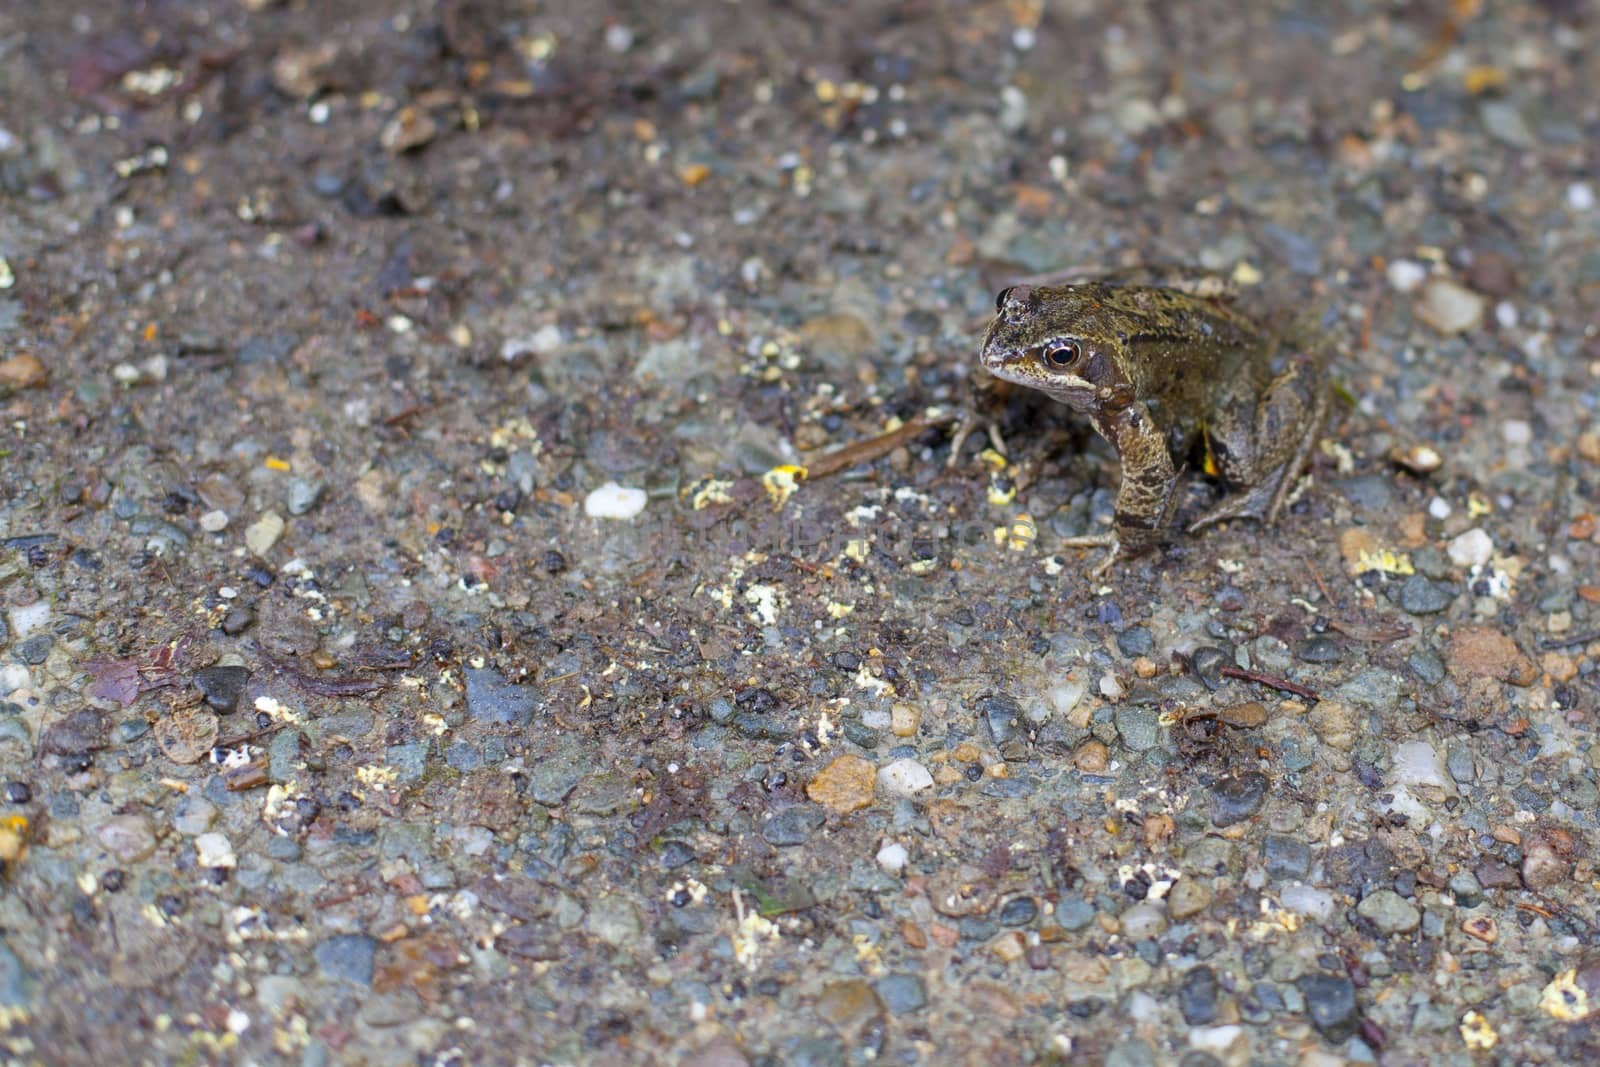 Frog camouflaged against the background